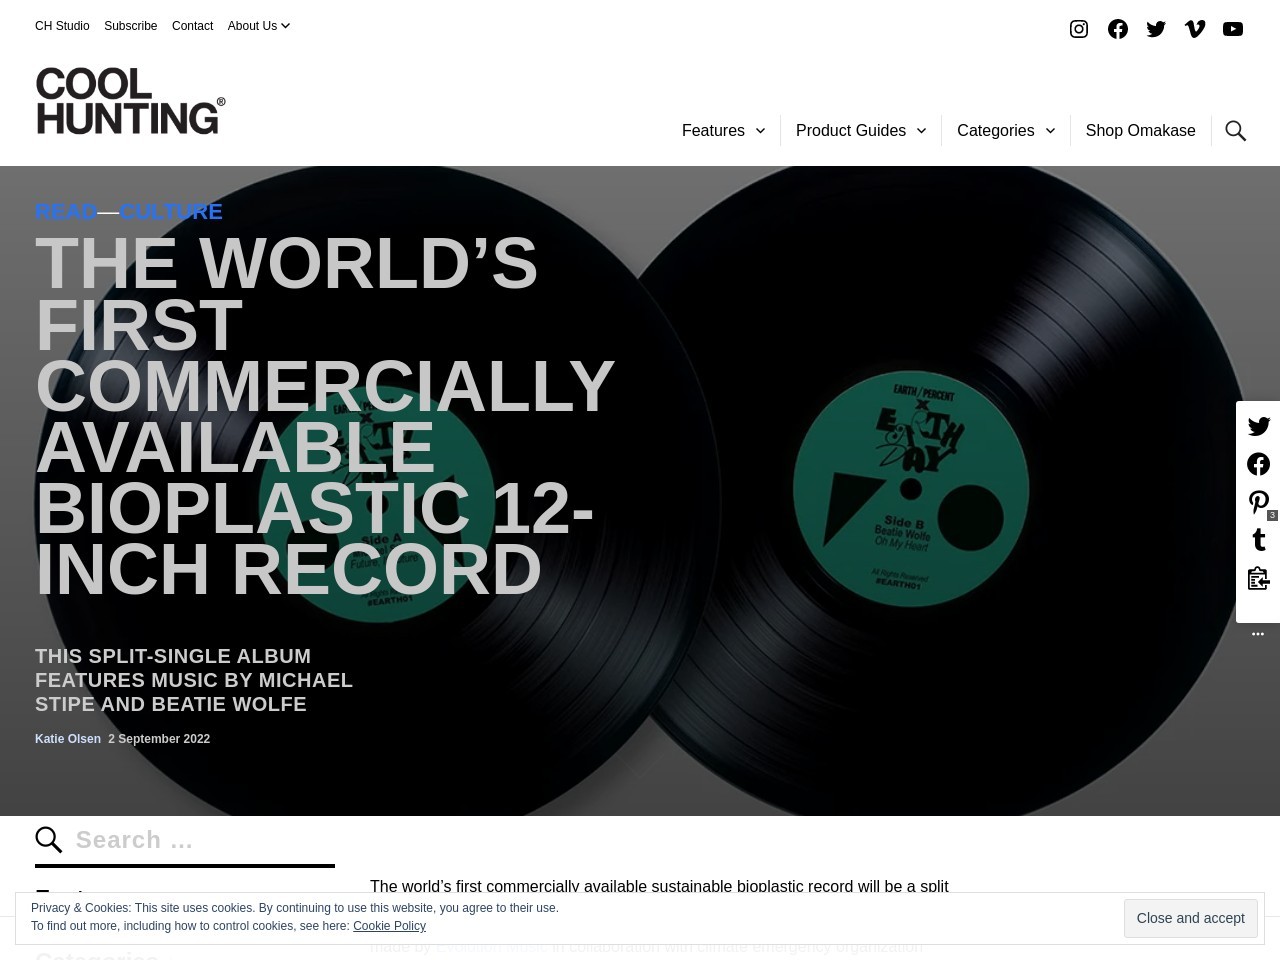 The World’s First Commercially Available Bioplastic 12-Inch Record – COOL HUNTING®